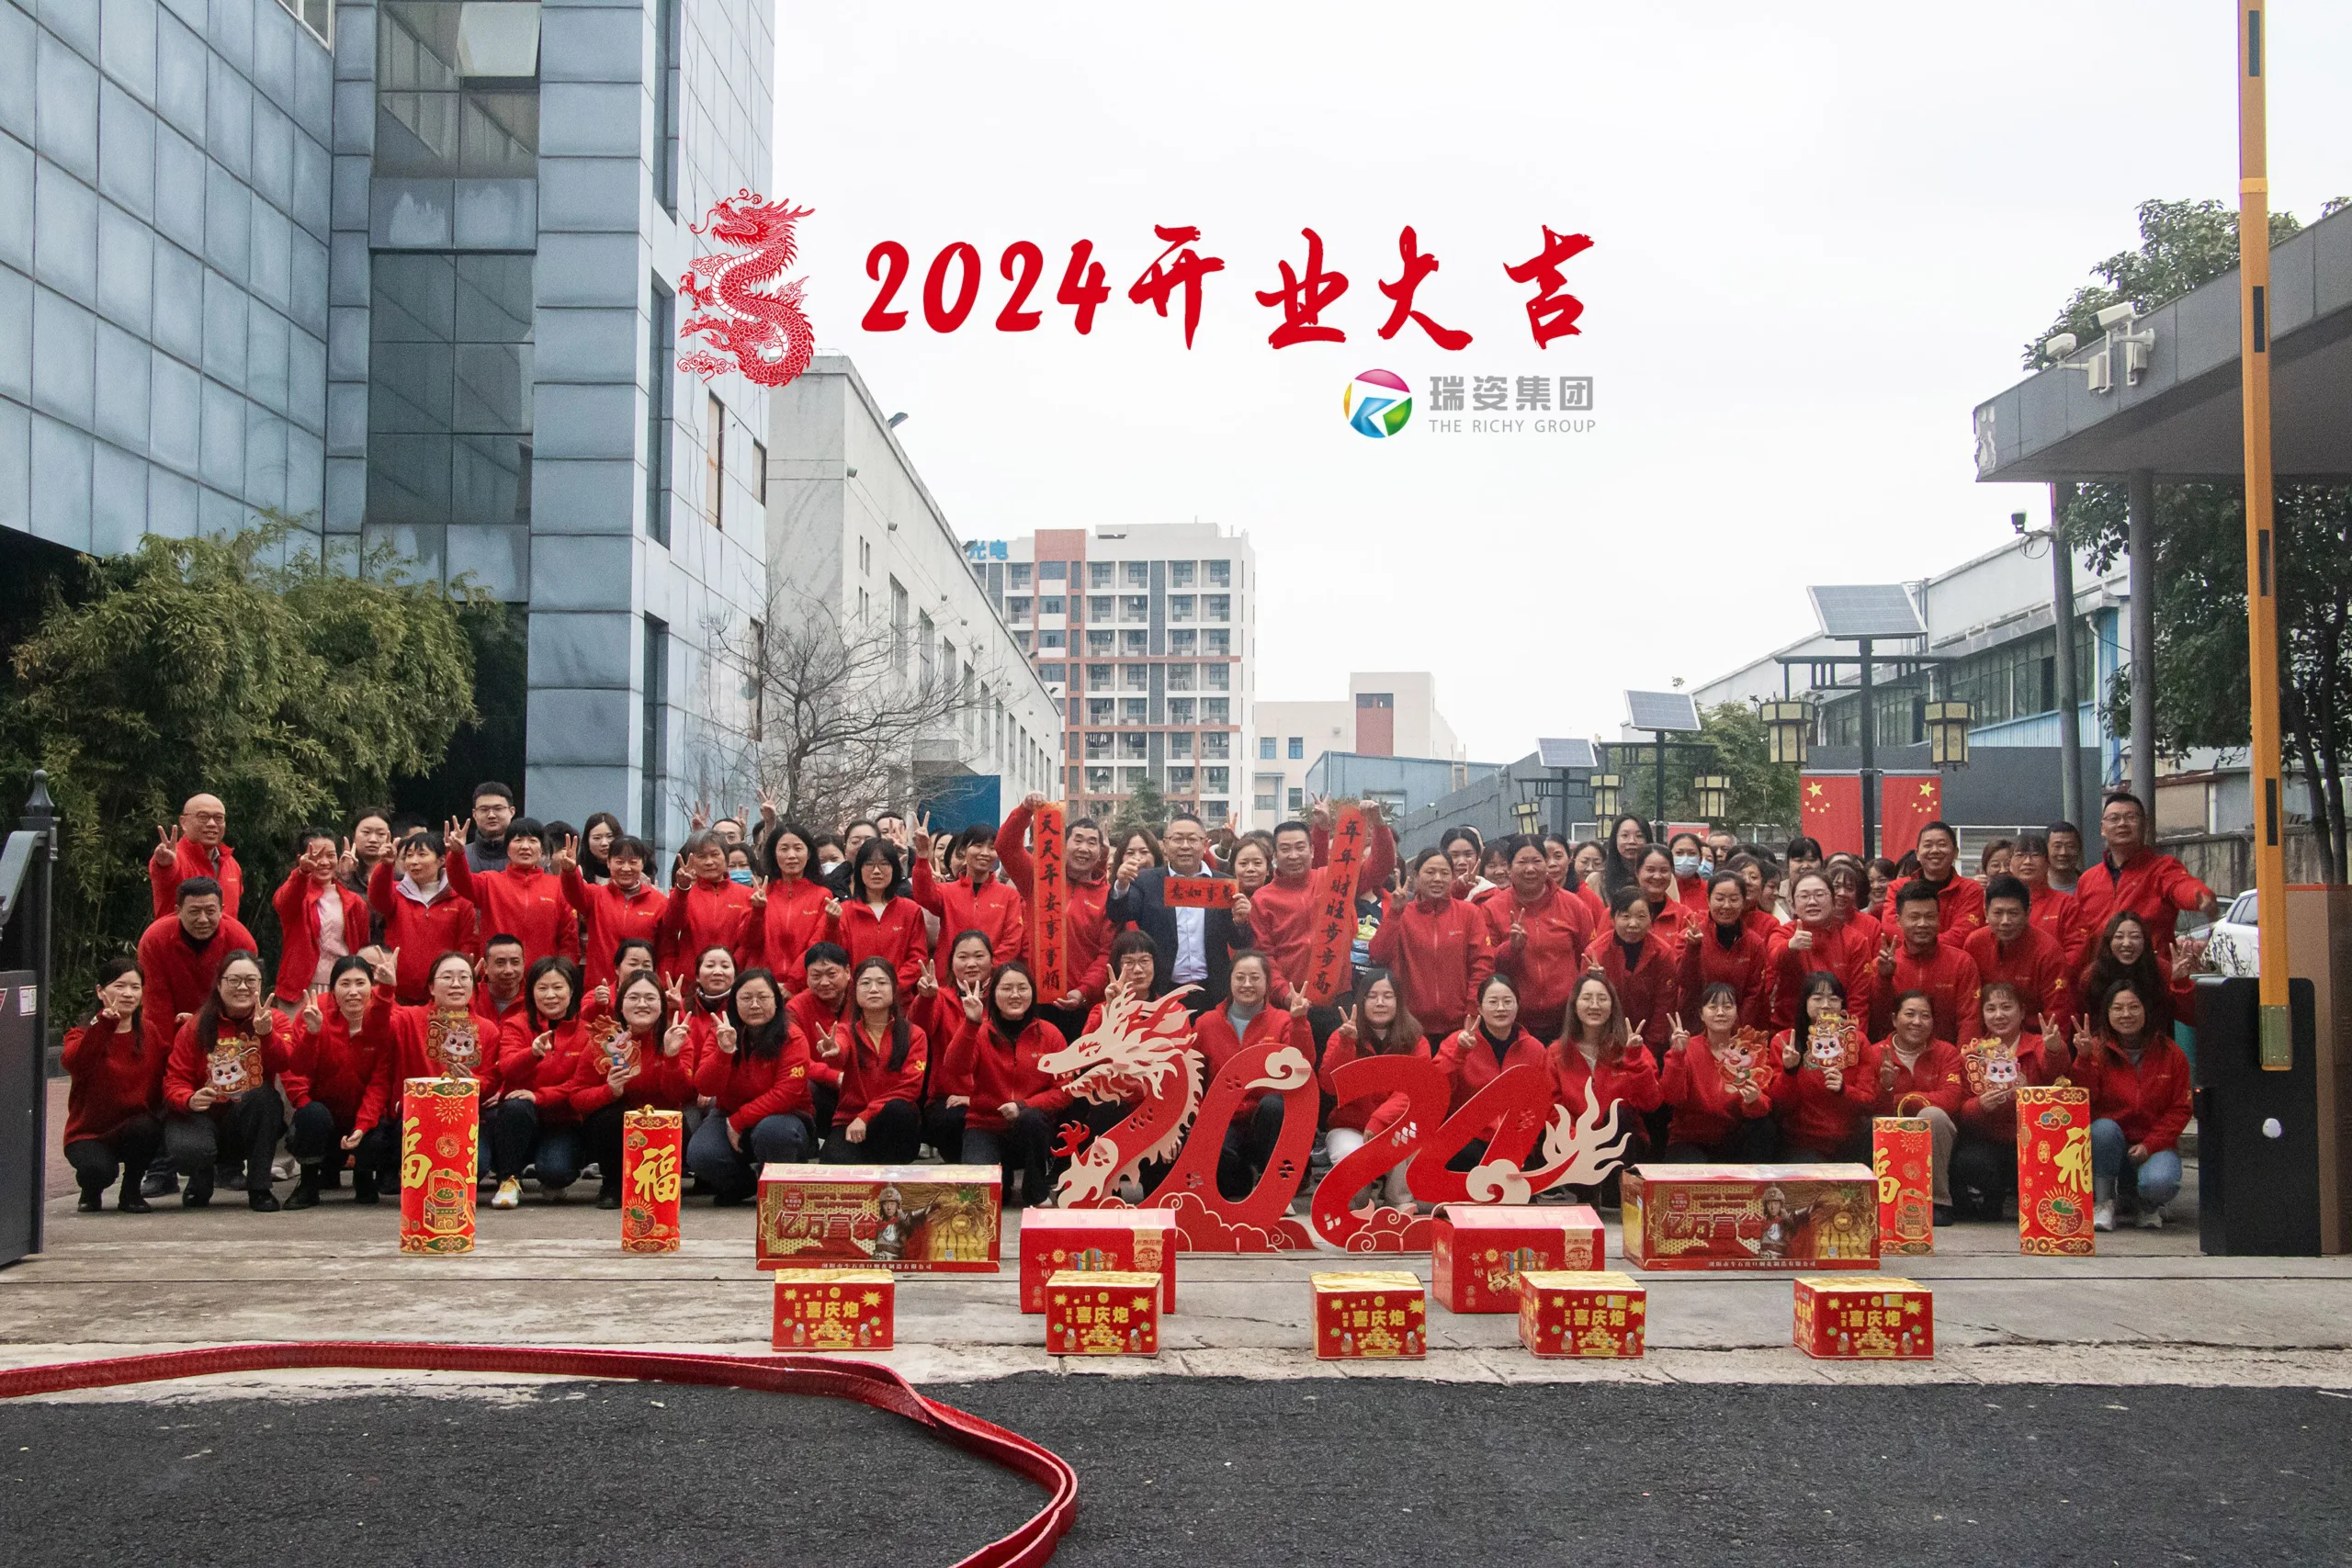 2024 Razorline Manufacturing Group photo in front of the opening of the company